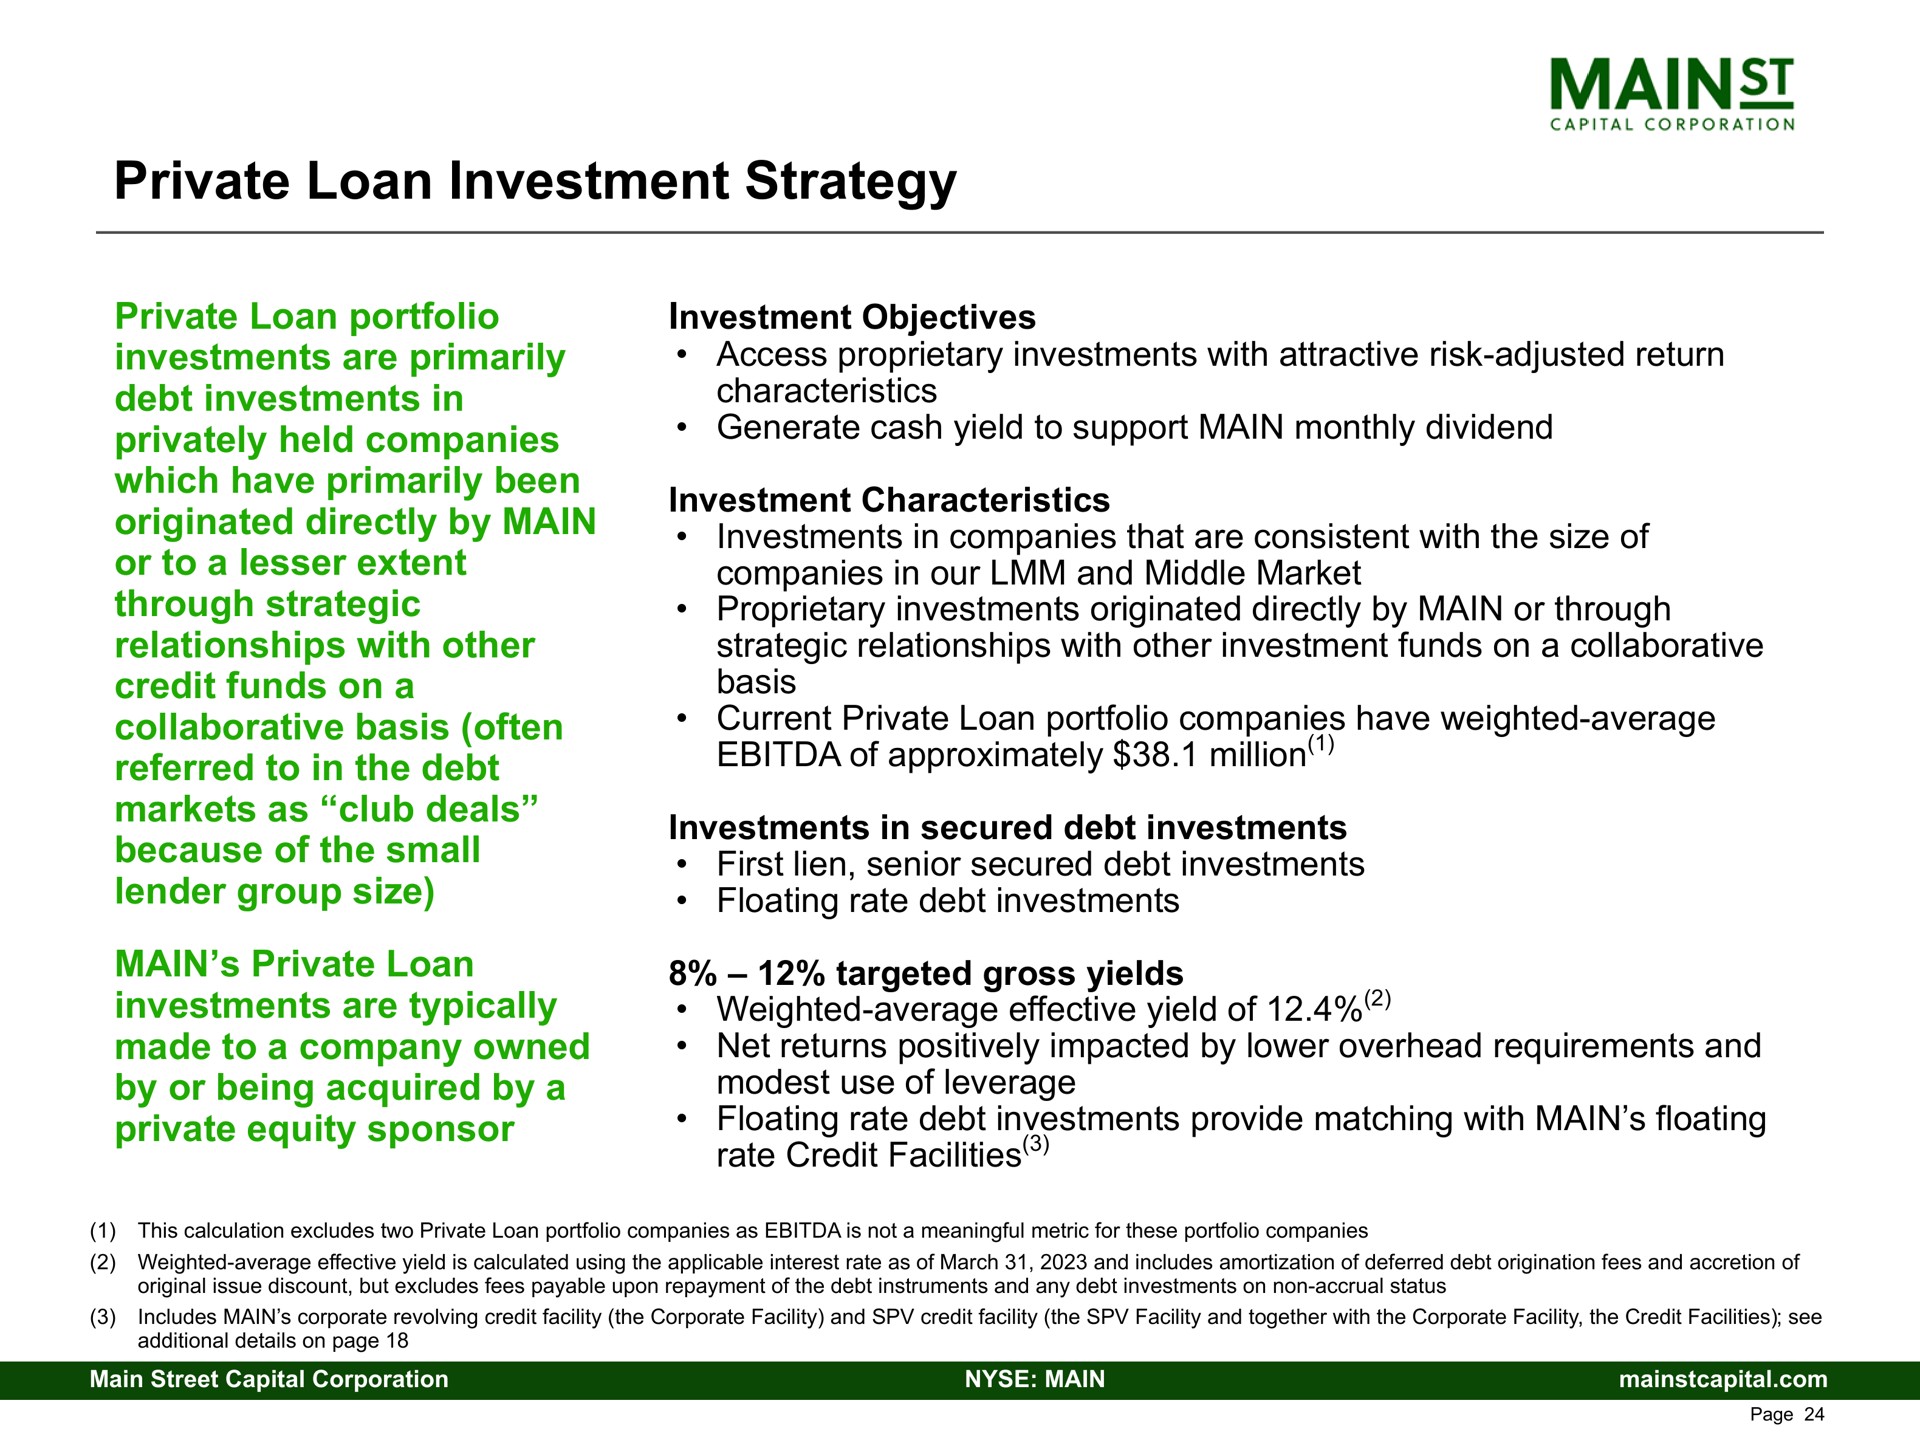 private loan investment strategy private loan portfolio investments are primarily debt investments in privately held companies which have primarily been originated directly by main or to a lesser extent through strategic relationships with other credit funds on a collaborative basis often referred to in the debt markets as club deals because of the small lender group size main private loan investments are typically made to a company owned by or being acquired by a private equity sponsor characteristics our and middle market approximately million | Main Street Capital